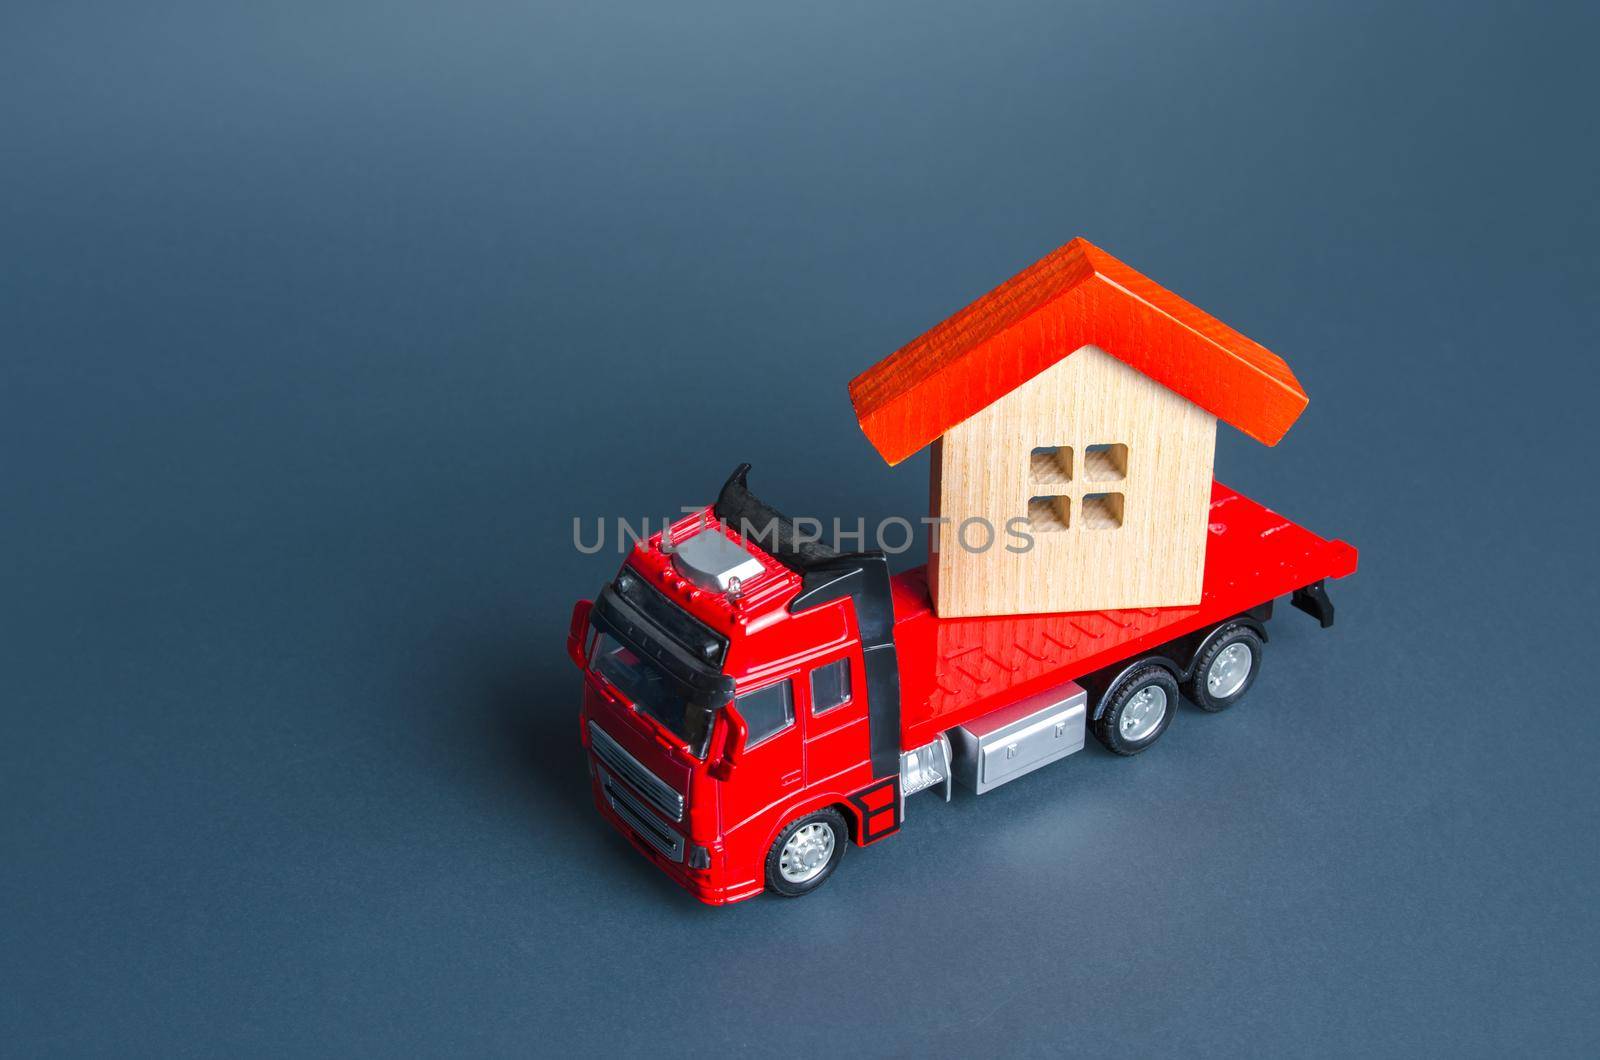 Truck transporting a house. Delivery services to another house. A moving company. Transportation of real estate. Resettlement program for new housing. Construction industry. Building insurance. by iLixe48